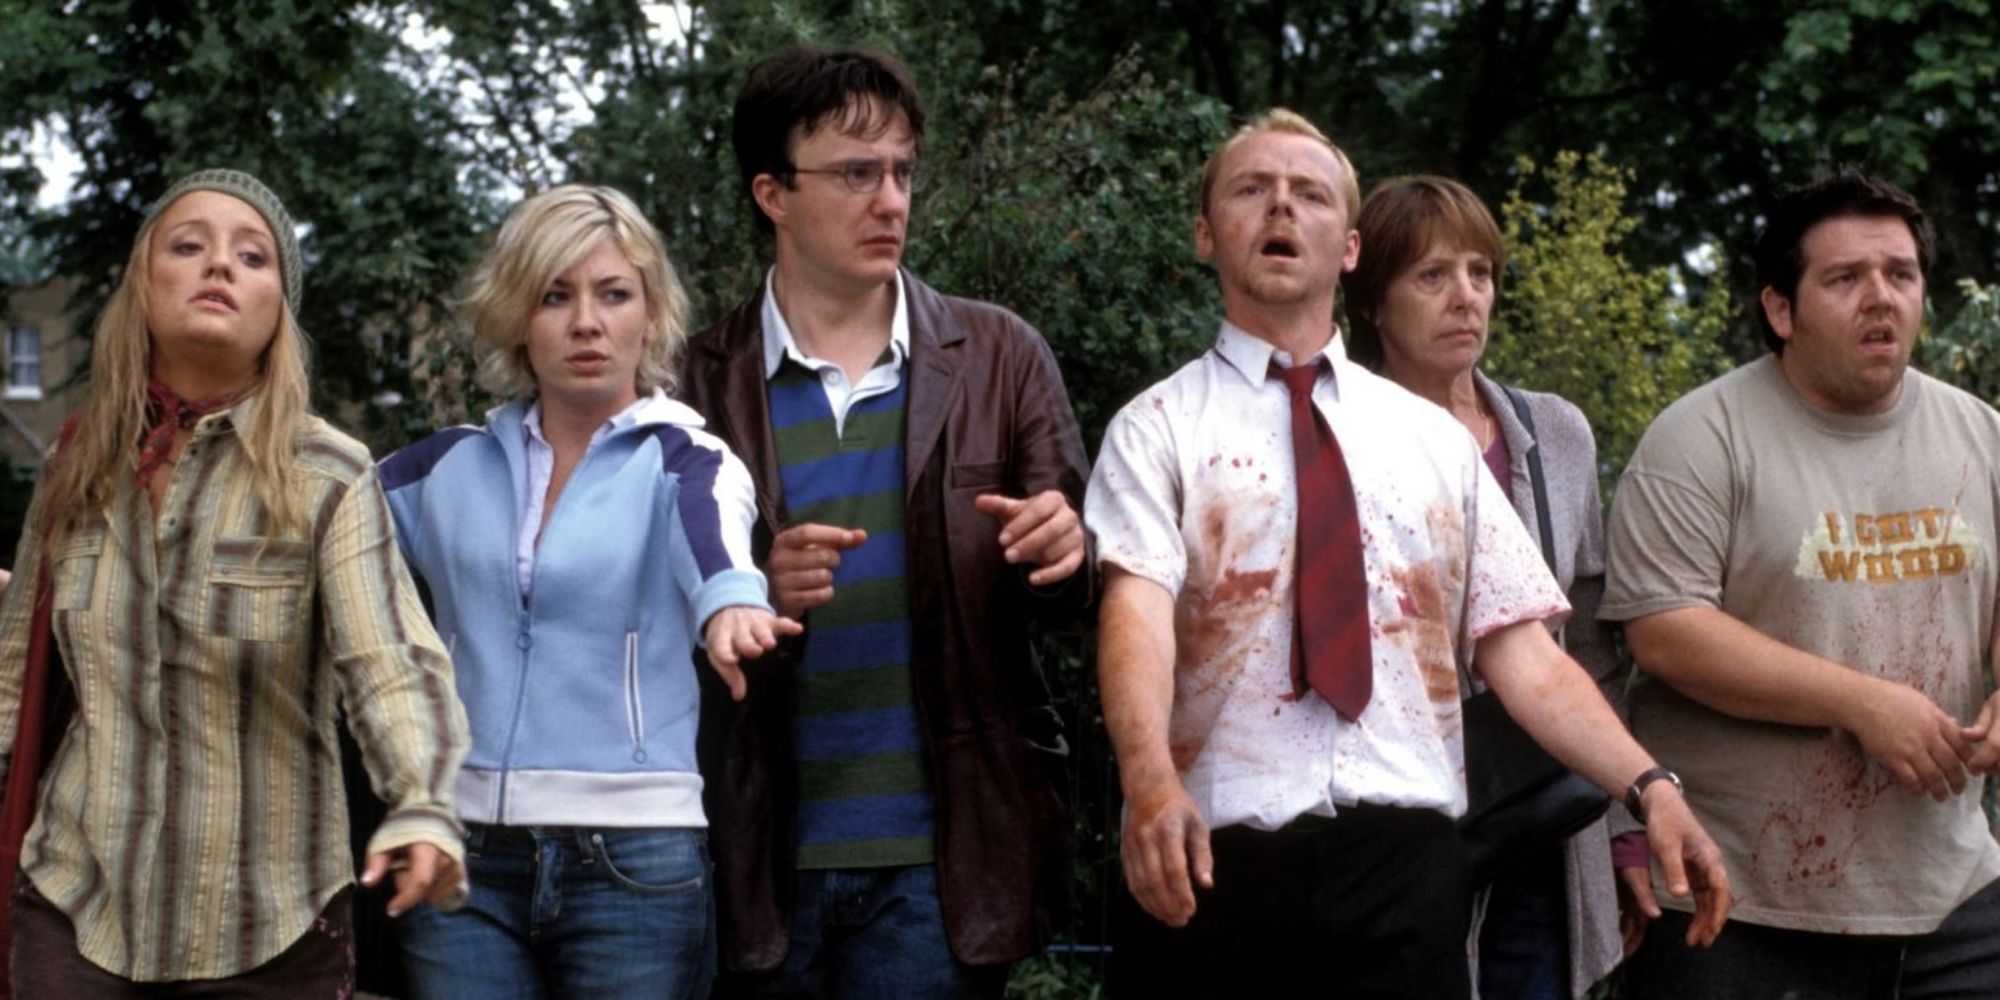 The main characters of Shaun of the Dead